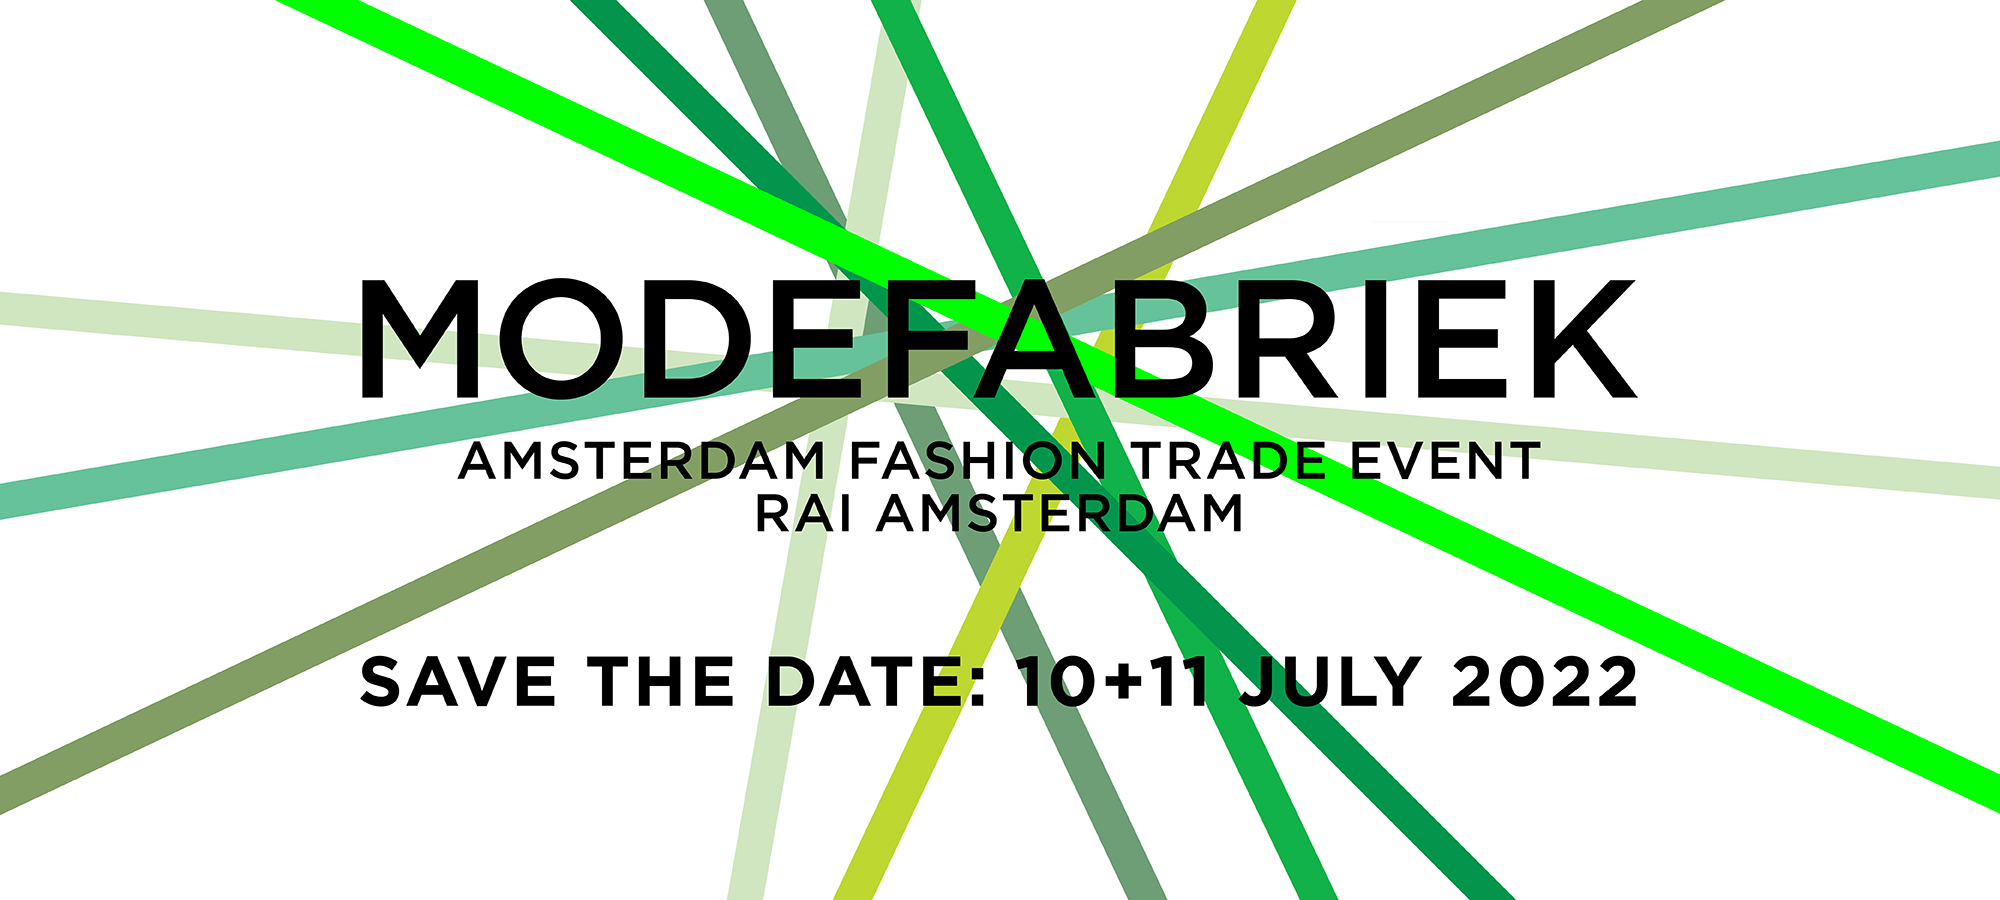 MODEFABRIEK IS GETTING READY FOR THE 2022 EDITION ON 10 AND 11 JULY!